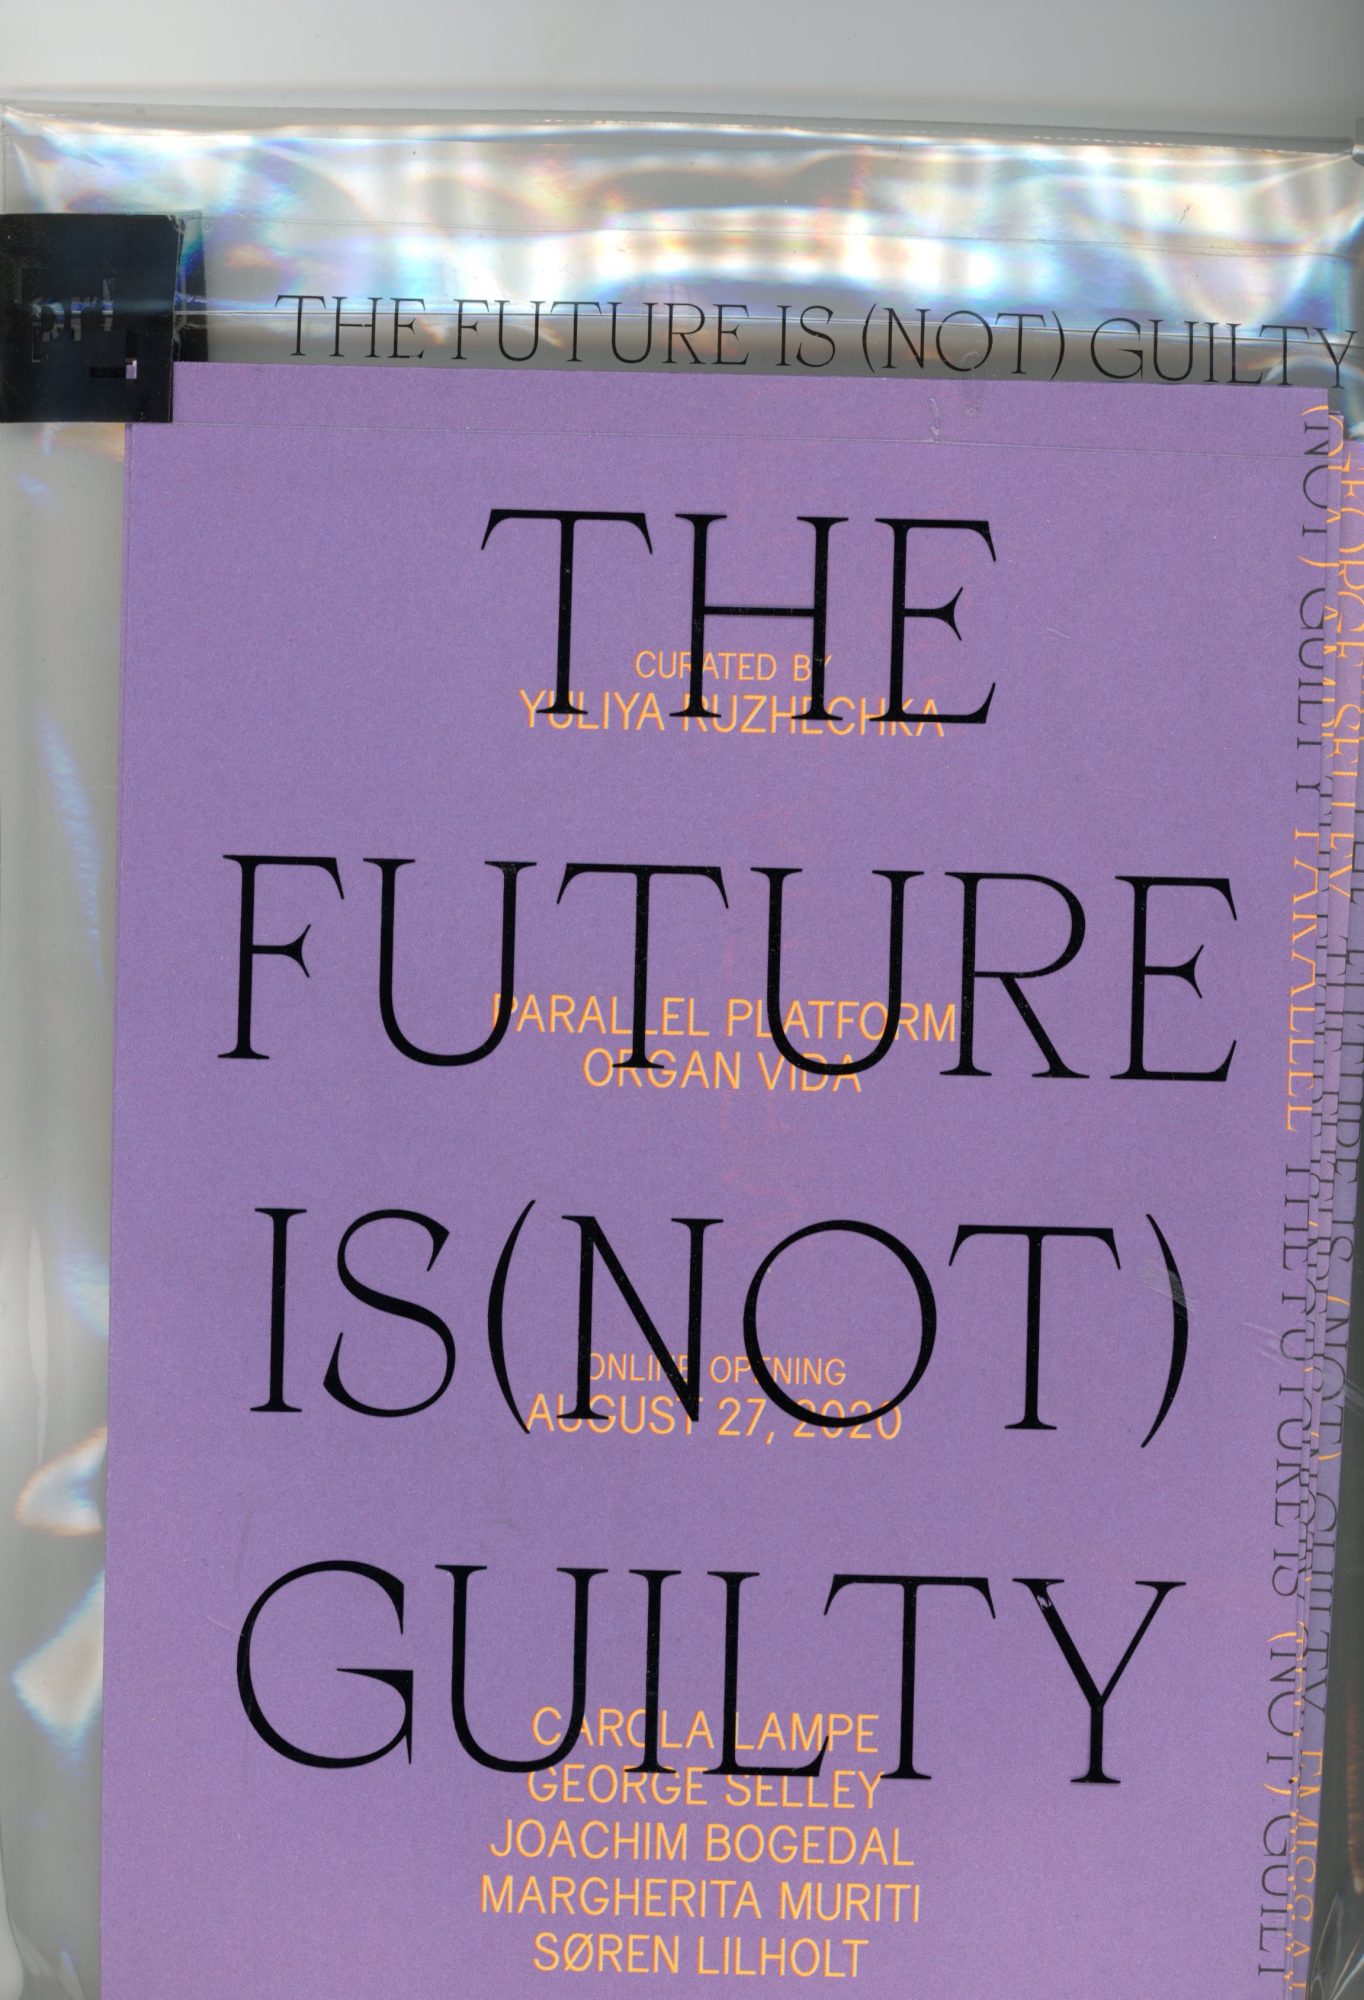 The Future Is (Not) Guilty